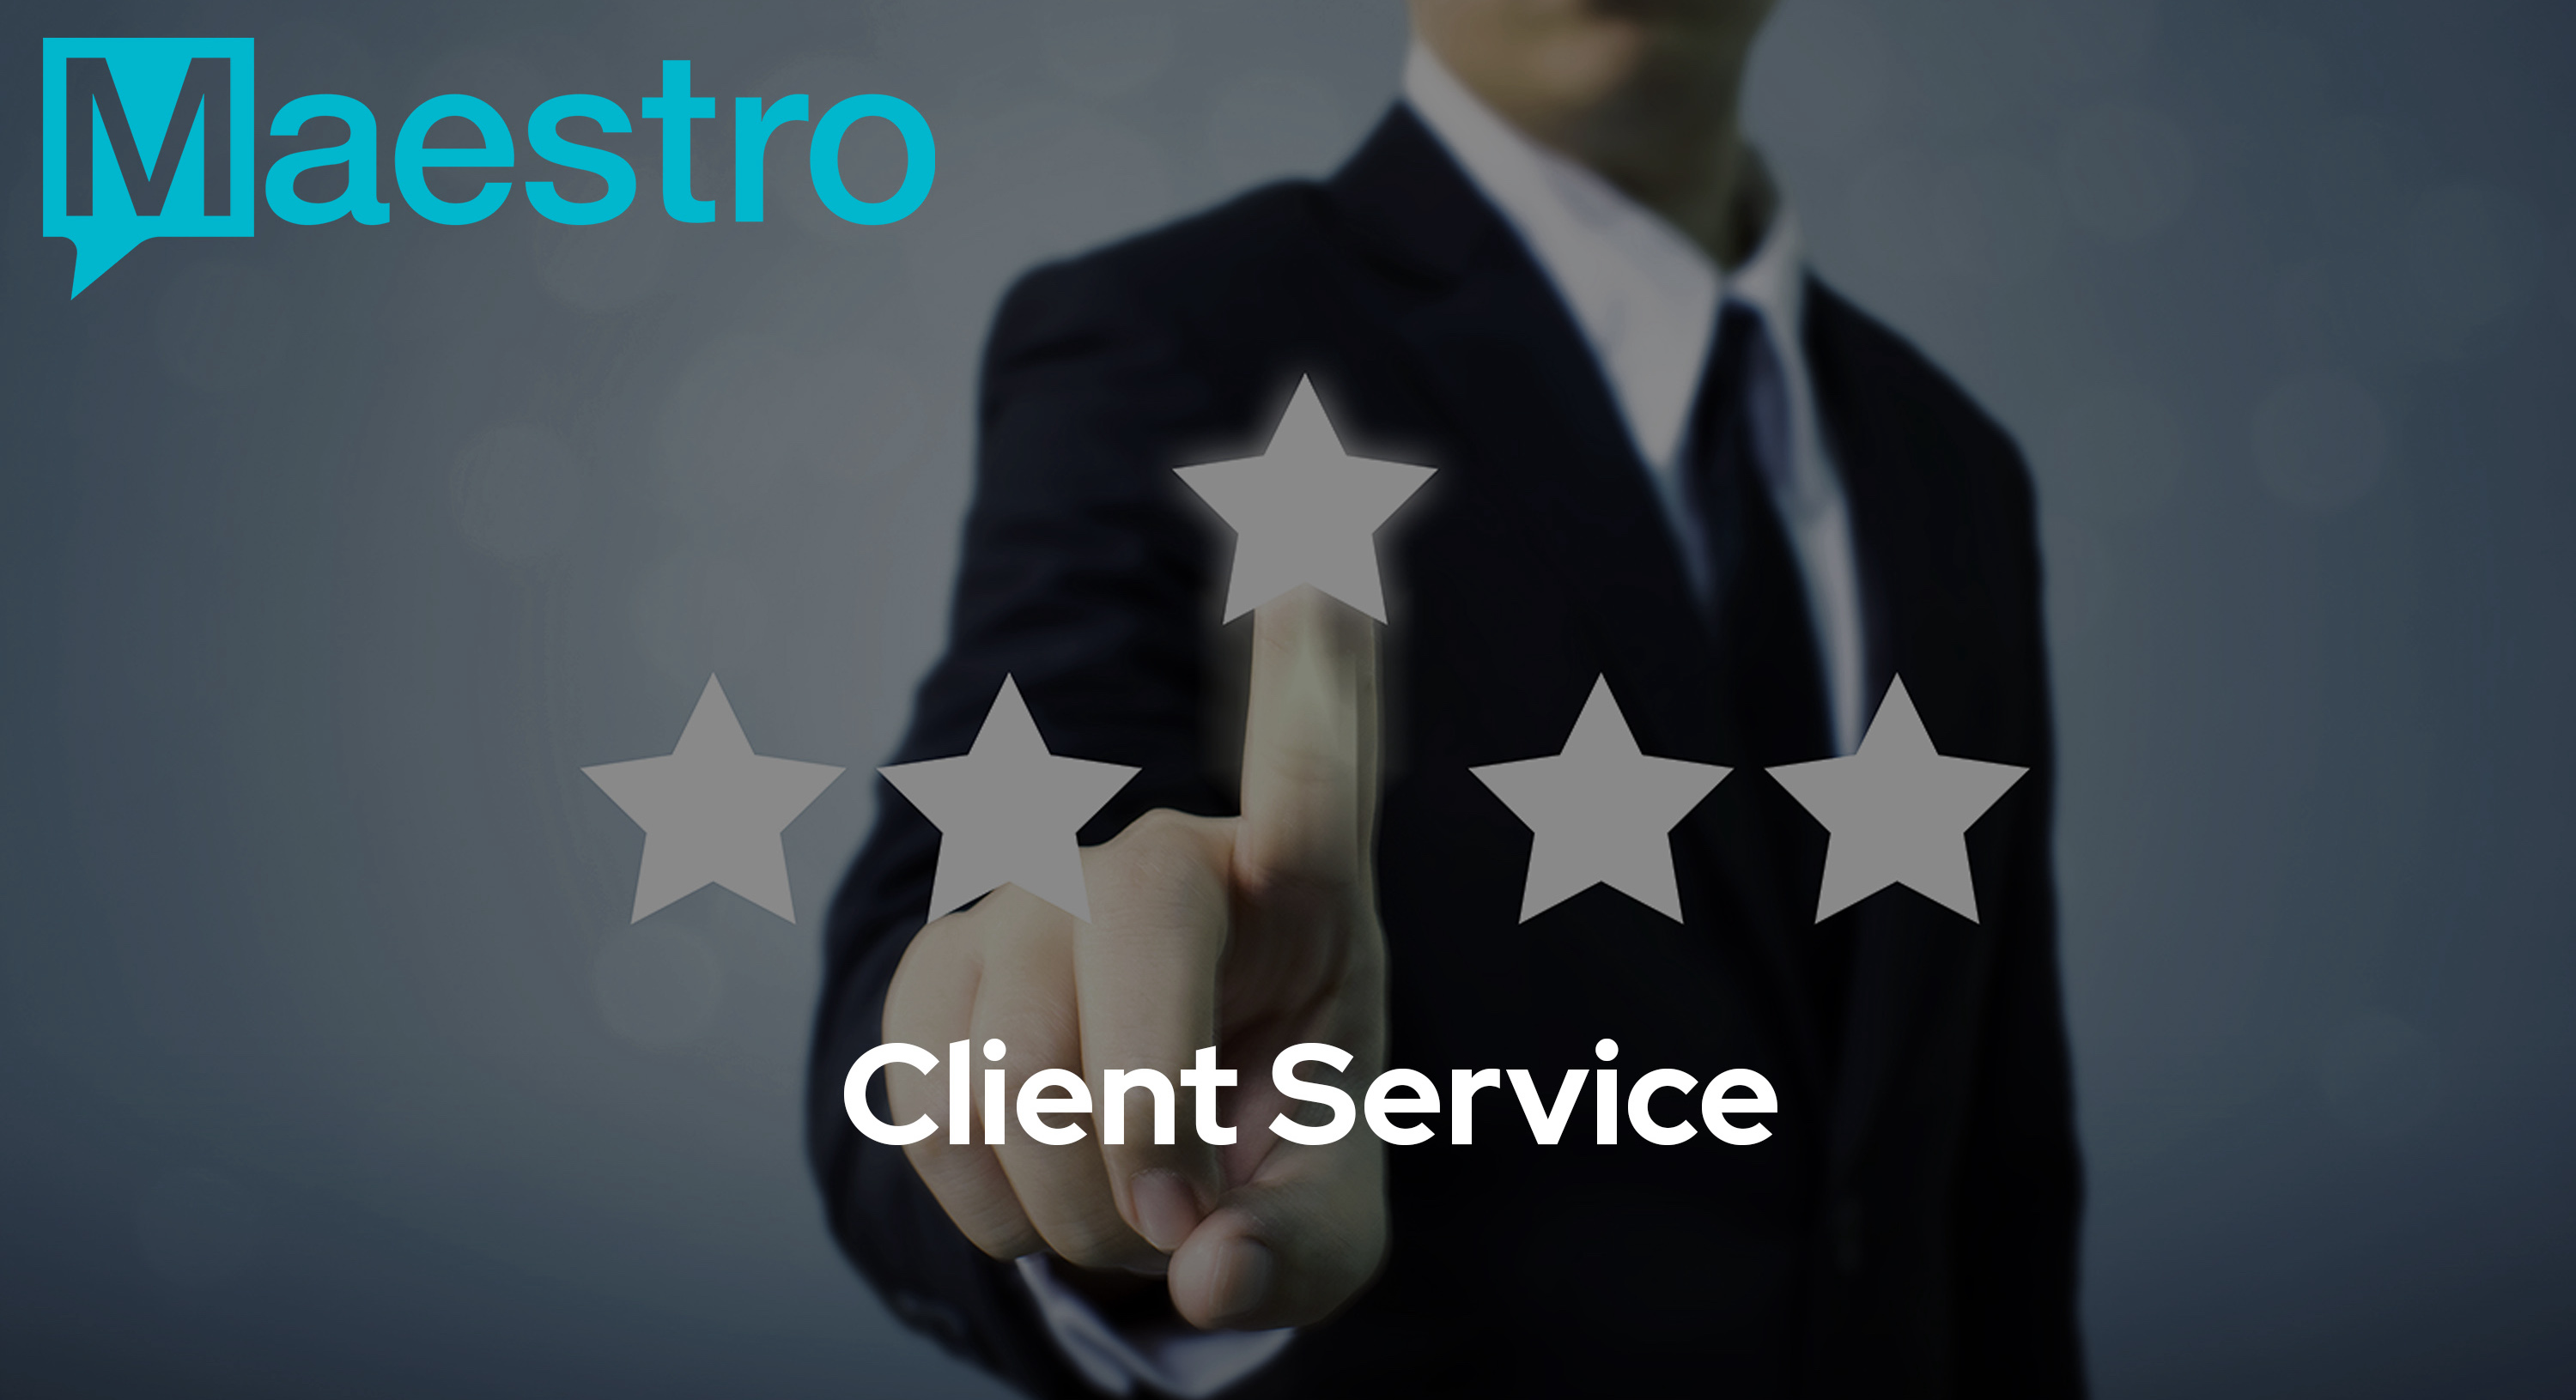 maestroprfeb8 - The Three Staple Traits of a Great PMS Partner: Service, Service, Service - Innovative Property Management Software Solutions Powering Hotels, Resorts & Multi‑Property Groups.